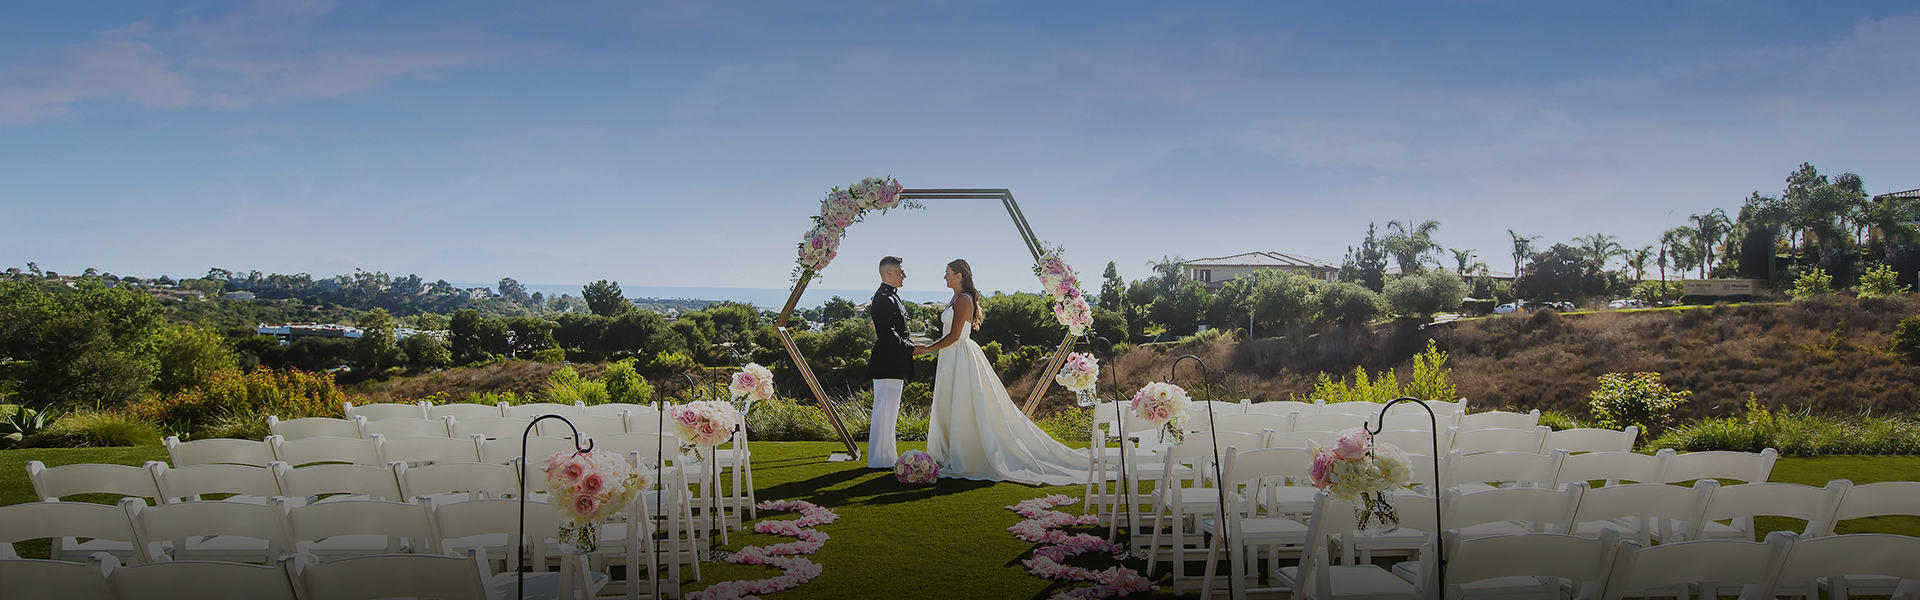 a dim image of a bride and groom standing on the golf course in front of rows of chairs